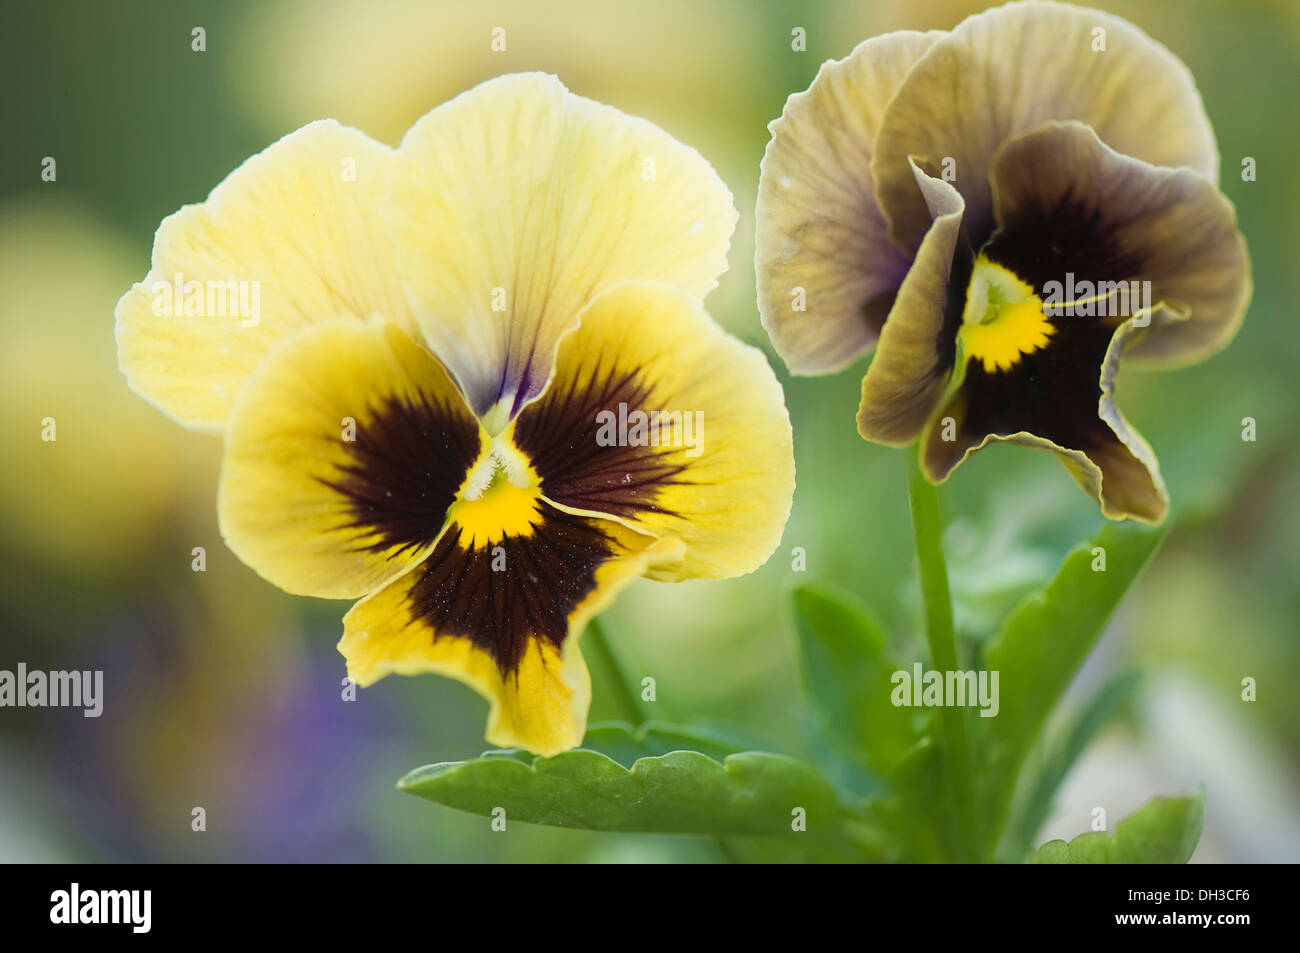 Pansy, Viola x wittrockiana. Two flowers in muted colours of yellow and brown with black and yellow at centre. Stock Photo